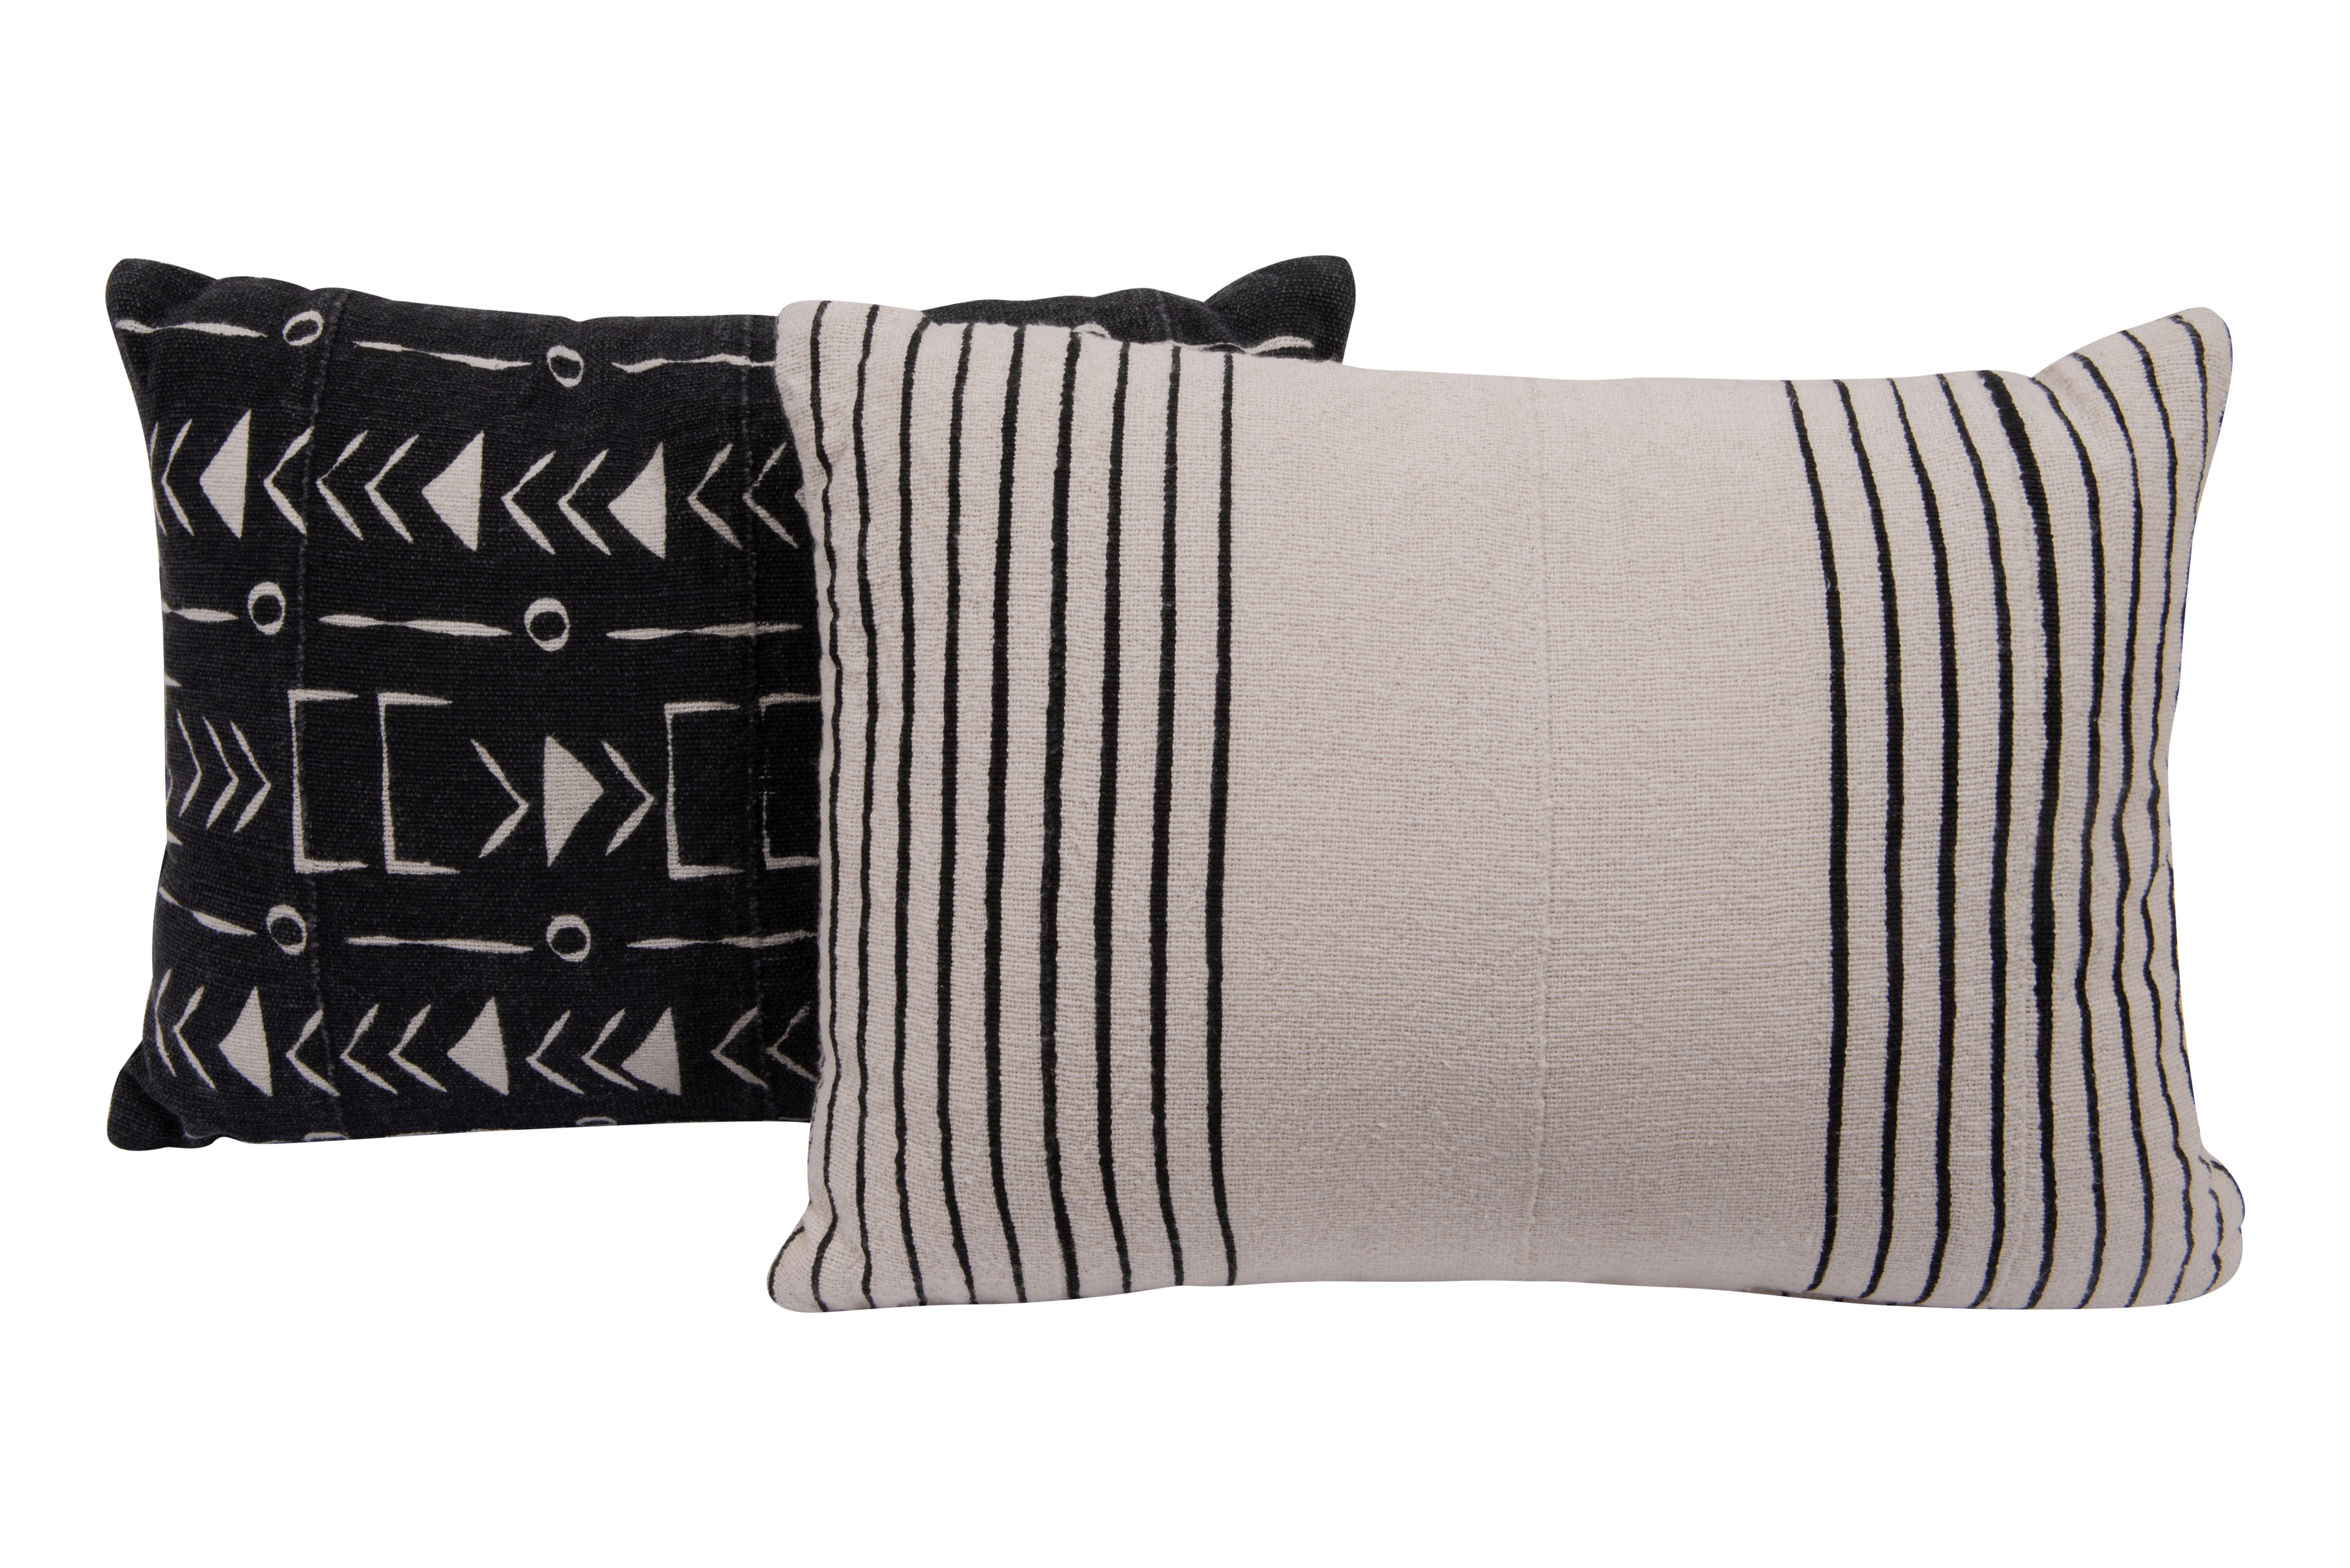 African Mudcloth Patterned Cotton Pillows, Black & White, Set of 2 - Image 1